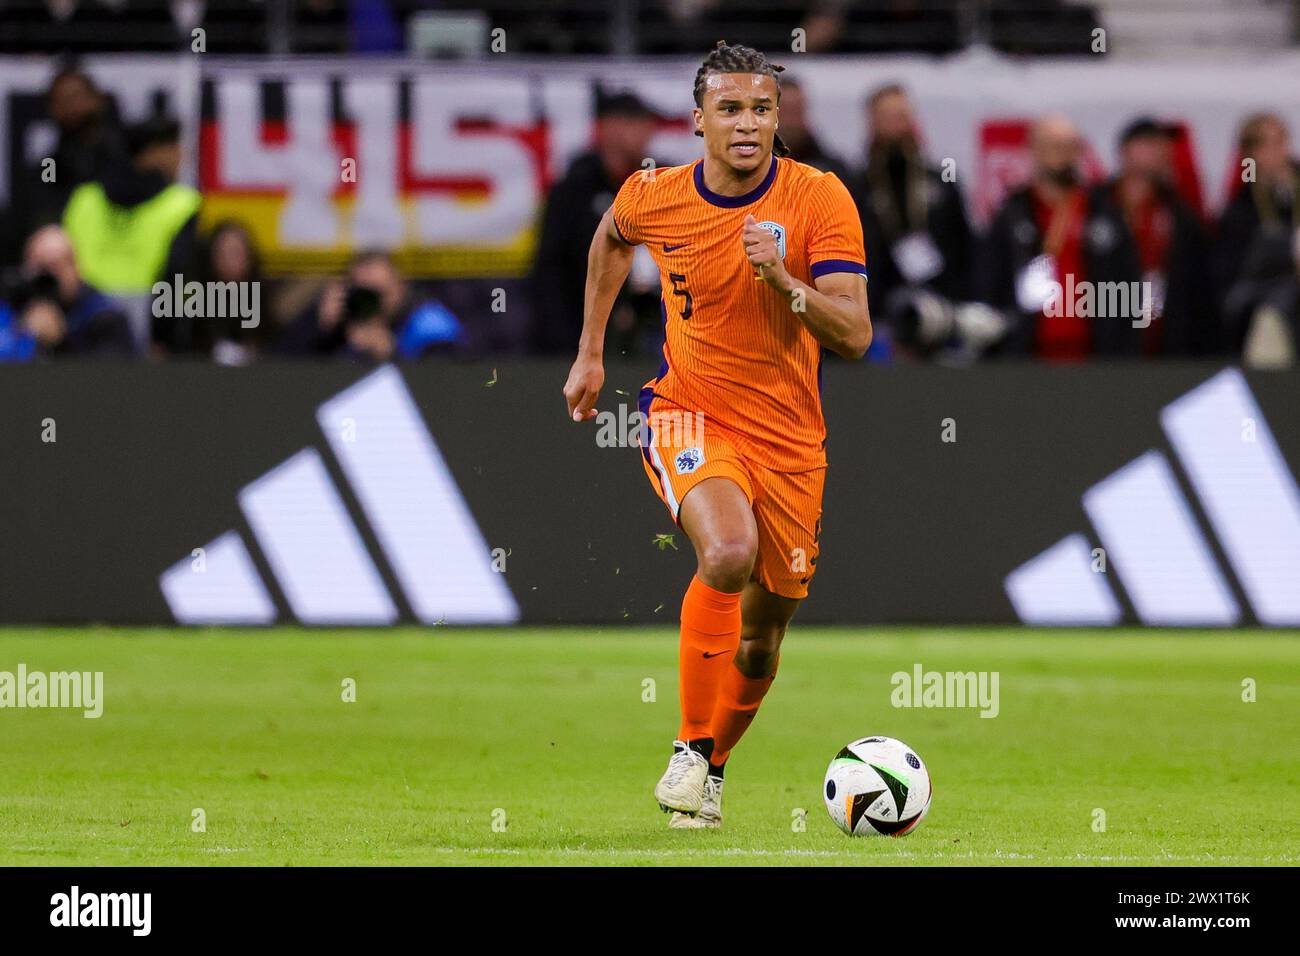 FRANKFURT AM MAIN, GERMANY - MARCH 26: Nathan Ake (Netherlands) Controls the ball during the friendly match match of Germany  and Netherlands at Deuts Stock Photo